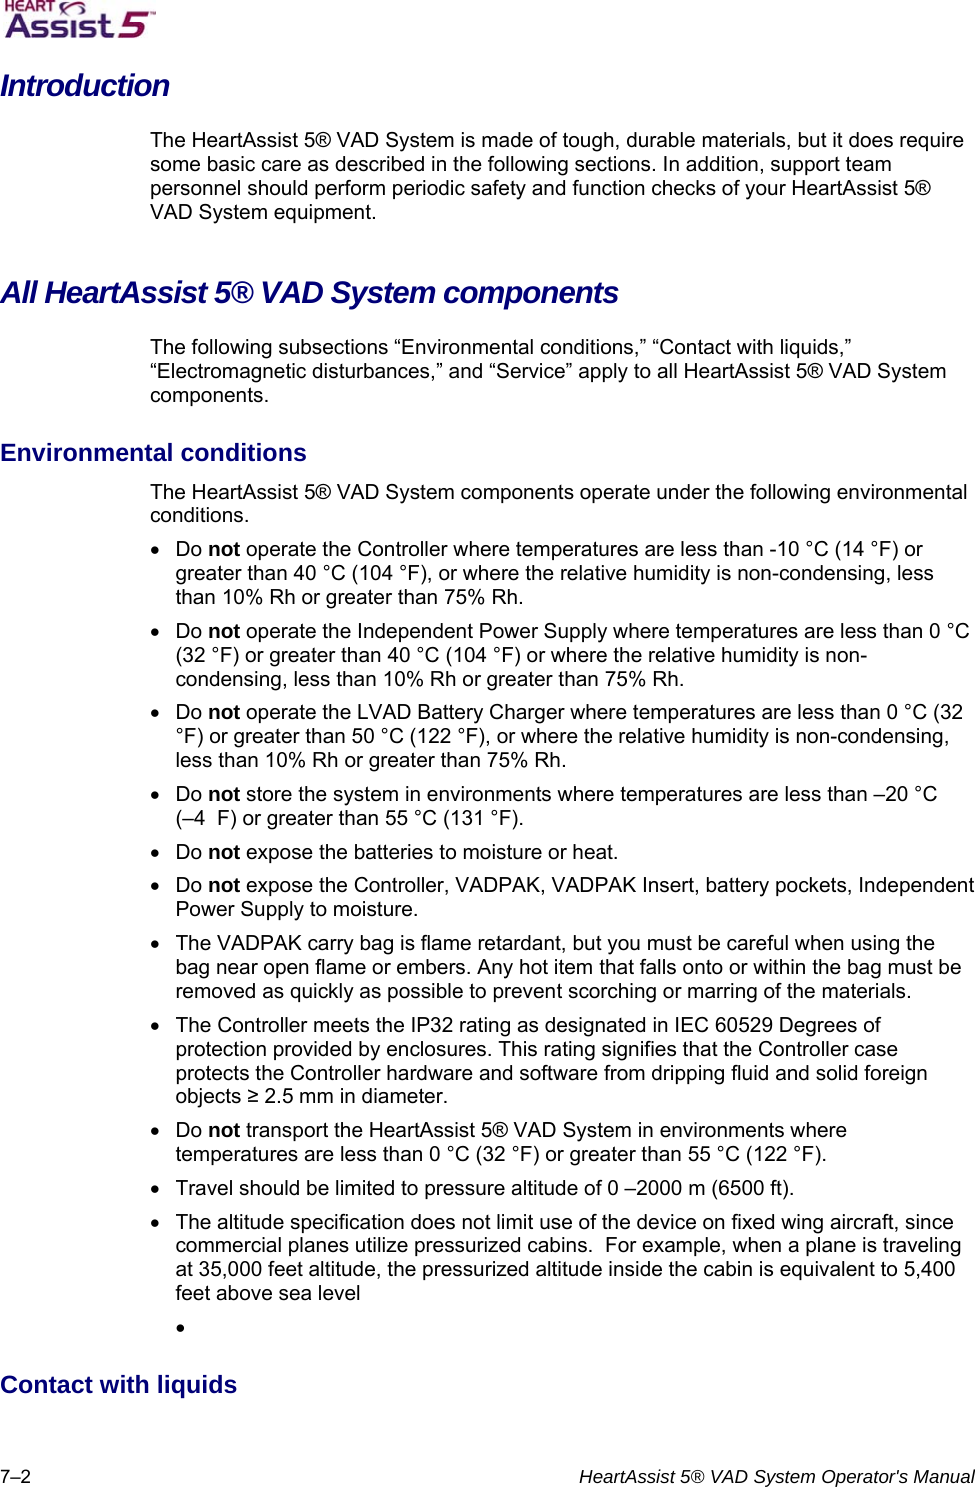   7–2  HeartAssist 5® VAD System Operator&apos;s Manual Introduction The HeartAssist 5® VAD System is made of tough, durable materials, but it does require some basic care as described in the following sections. In addition, support team personnel should perform periodic safety and function checks of your HeartAssist 5® VAD System equipment.  All HeartAssist 5® VAD System components  The following subsections “Environmental conditions,” “Contact with liquids,” “Electromagnetic disturbances,” and “Service” apply to all HeartAssist 5® VAD System components.  Environmental conditions  The HeartAssist 5® VAD System components operate under the following environmental conditions.   Do not operate the Controller where temperatures are less than -10 °C (14 °F) or greater than 40 °C (104 °F), or where the relative humidity is non-condensing, less than 10% Rh or greater than 75% Rh.   Do not operate the Independent Power Supply where temperatures are less than 0 °C (32 °F) or greater than 40 °C (104 °F) or where the relative humidity is non-condensing, less than 10% Rh or greater than 75% Rh.   Do not operate the LVAD Battery Charger where temperatures are less than 0 °C (32 °F) or greater than 50 °C (122 °F), or where the relative humidity is non-condensing, less than 10% Rh or greater than 75% Rh.   Do not store the system in environments where temperatures are less than –20 °C  (–4  F) or greater than 55 °C (131 °F).   Do not expose the batteries to moisture or heat.   Do not expose the Controller, VADPAK, VADPAK Insert, battery pockets, Independent Power Supply to moisture.    The VADPAK carry bag is flame retardant, but you must be careful when using the bag near open flame or embers. Any hot item that falls onto or within the bag must be removed as quickly as possible to prevent scorching or marring of the materials.    The Controller meets the IP32 rating as designated in IEC 60529 Degrees of protection provided by enclosures. This rating signifies that the Controller case protects the Controller hardware and software from dripping fluid and solid foreign objects ≥ 2.5 mm in diameter.   Do not transport the HeartAssist 5® VAD System in environments where temperatures are less than 0 °C (32 °F) or greater than 55 °C (122 °F).    Travel should be limited to pressure altitude of 0 –2000 m (6500 ft).    The altitude specification does not limit use of the device on fixed wing aircraft, since commercial planes utilize pressurized cabins.  For example, when a plane is traveling at 35,000 feet altitude, the pressurized altitude inside the cabin is equivalent to 5,400 feet above sea level   Contact with liquids  